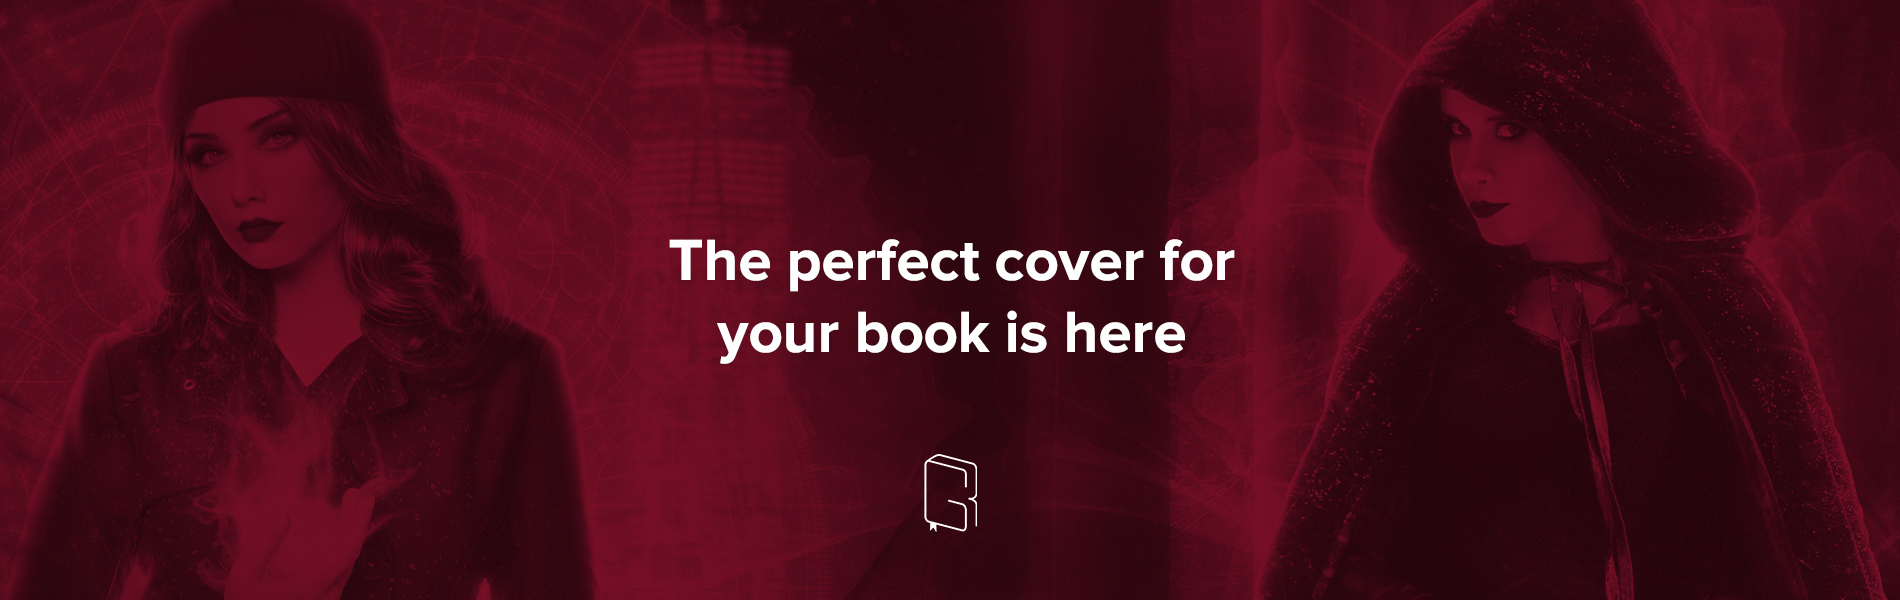 The perfect cover for your book is here